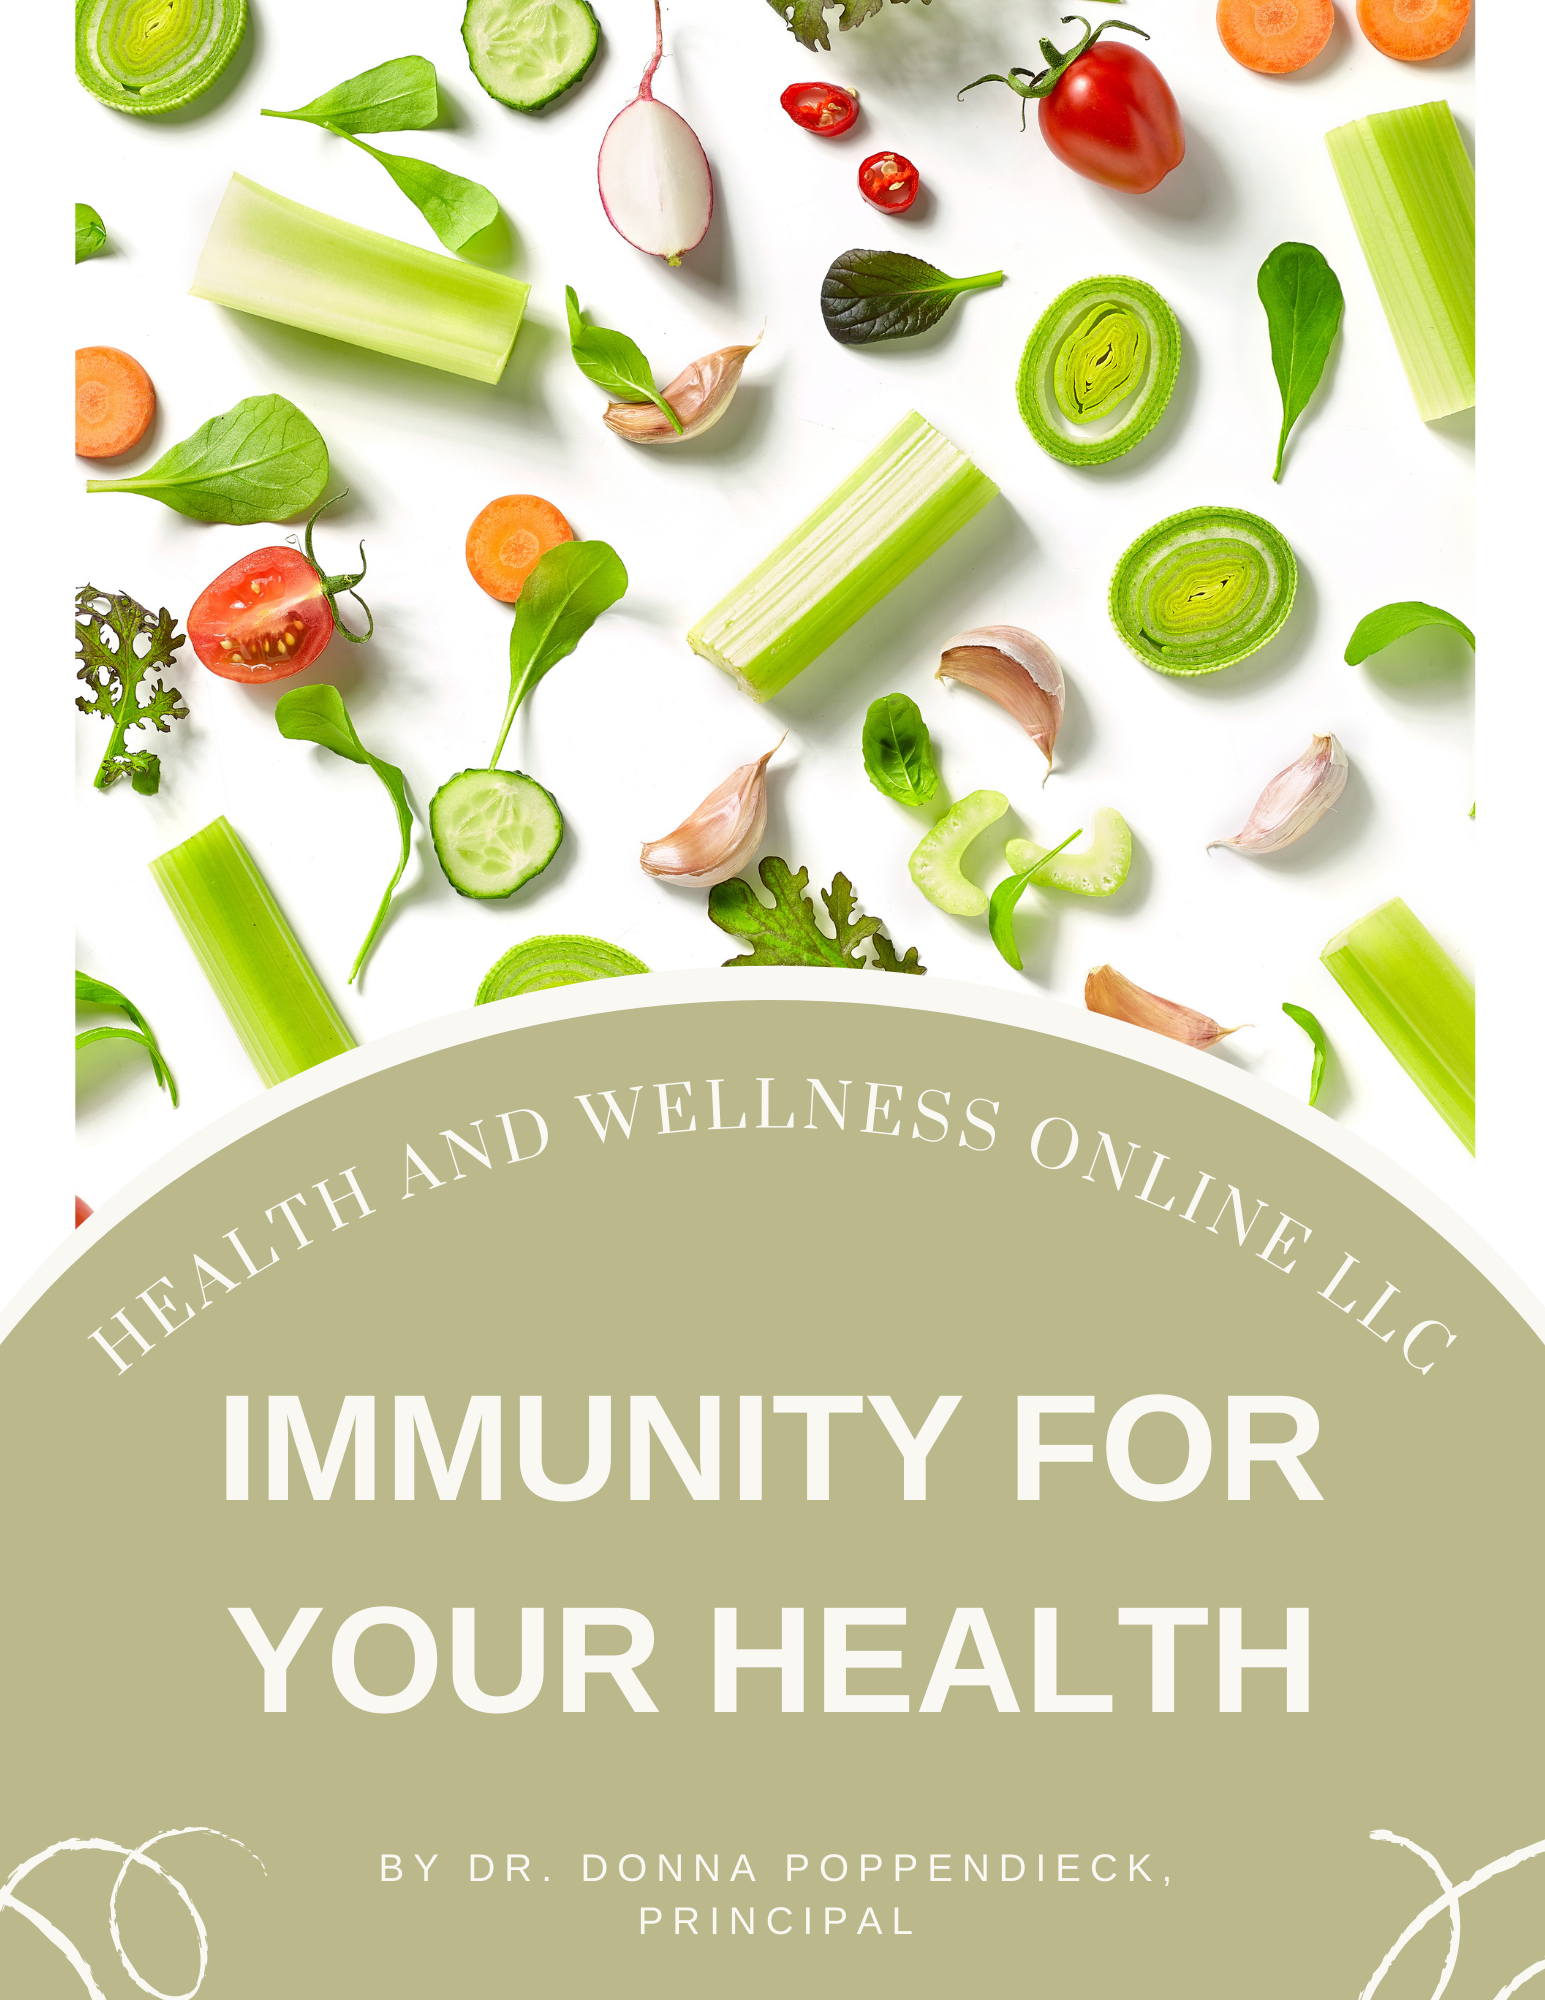 Immunity for Your Health is a course by Dr. Donna Poppendieck from Health and Wellness Online.